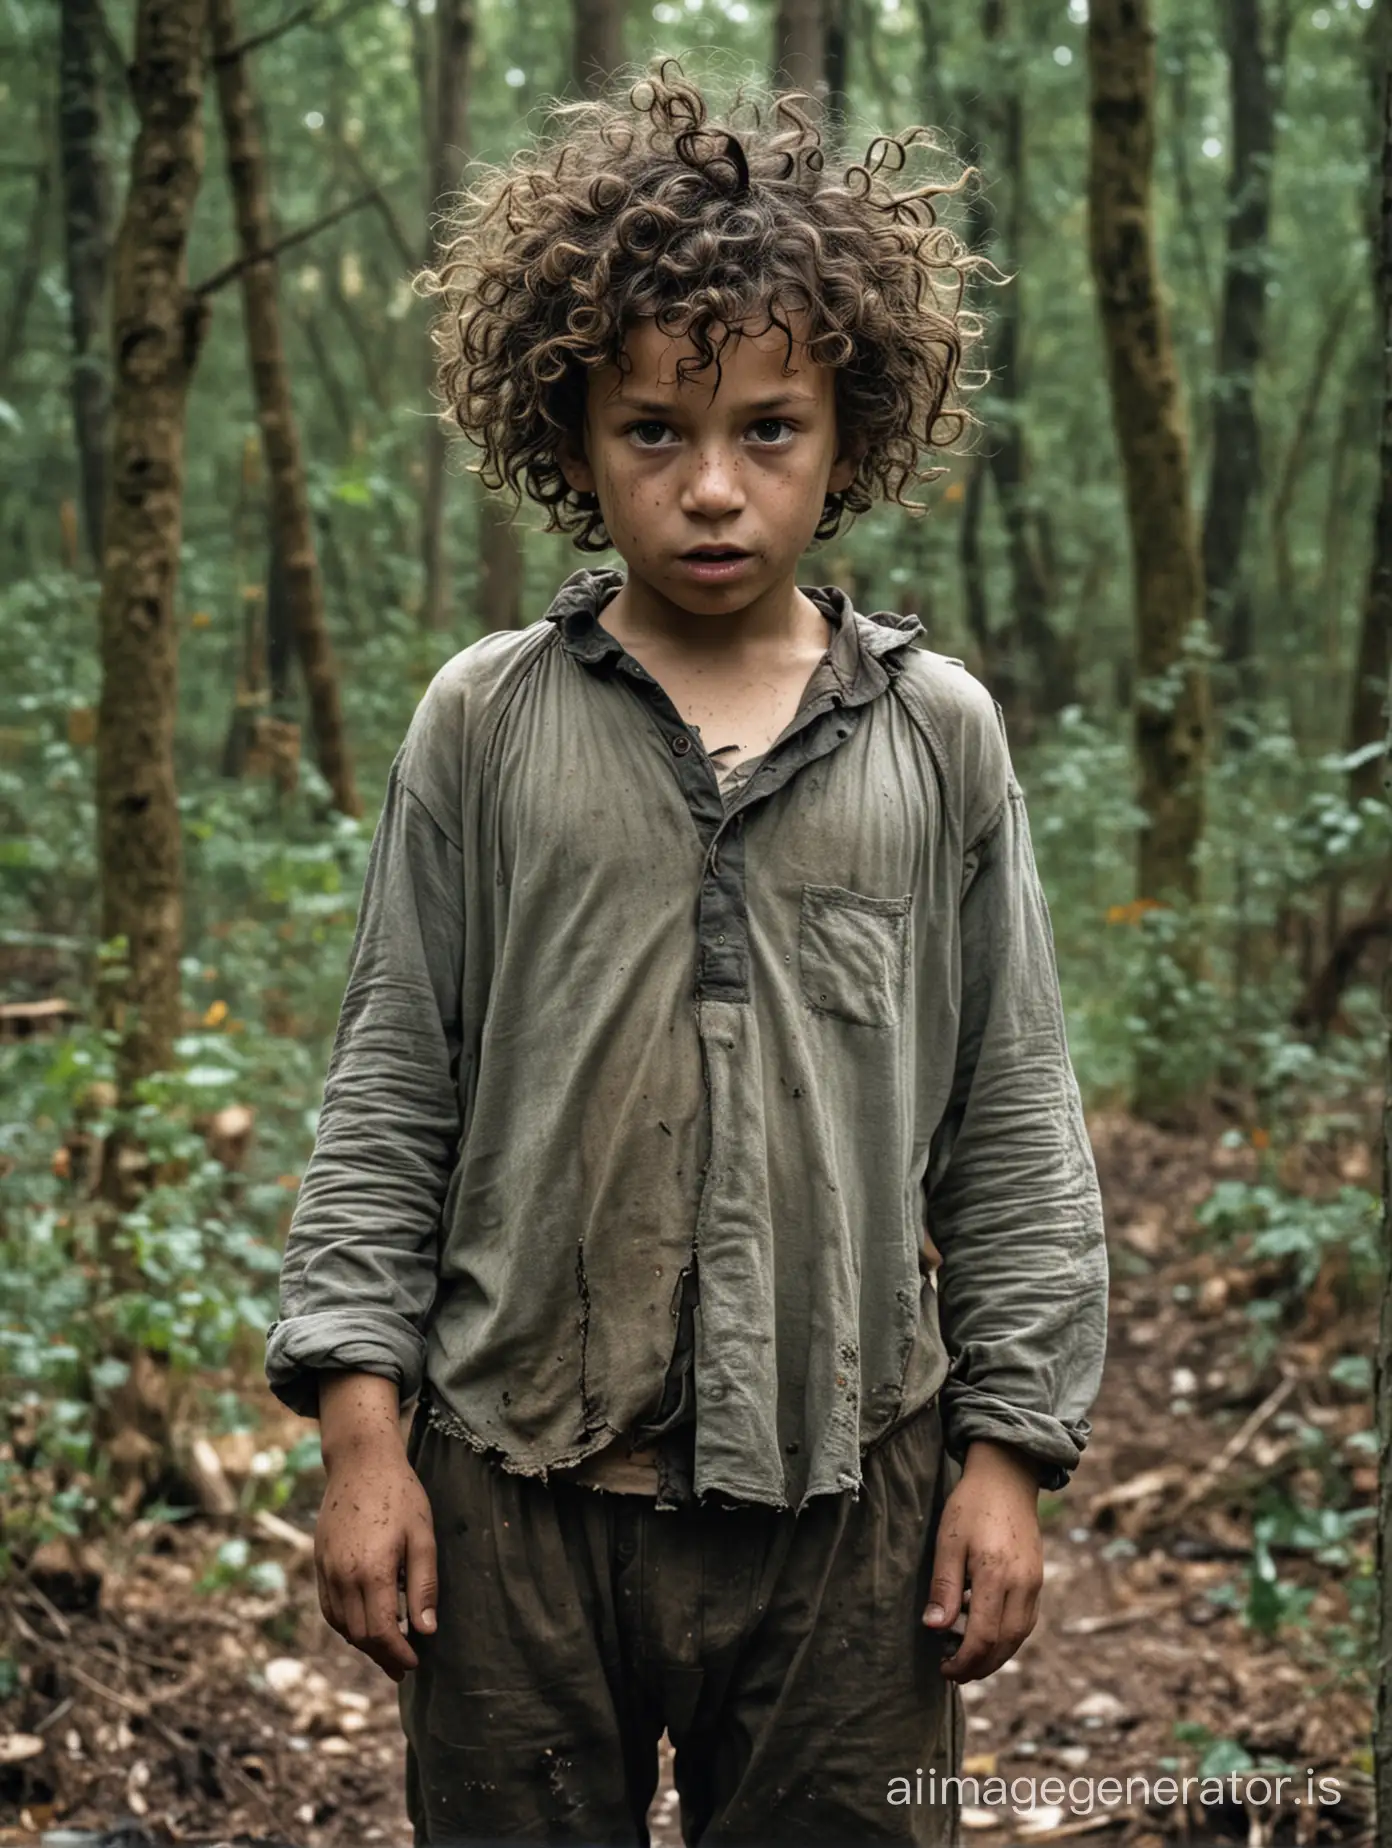 a kid, wild child living in the forest, face very dirty, clothes torn, hair very long, black, curly and dirty, in 1920